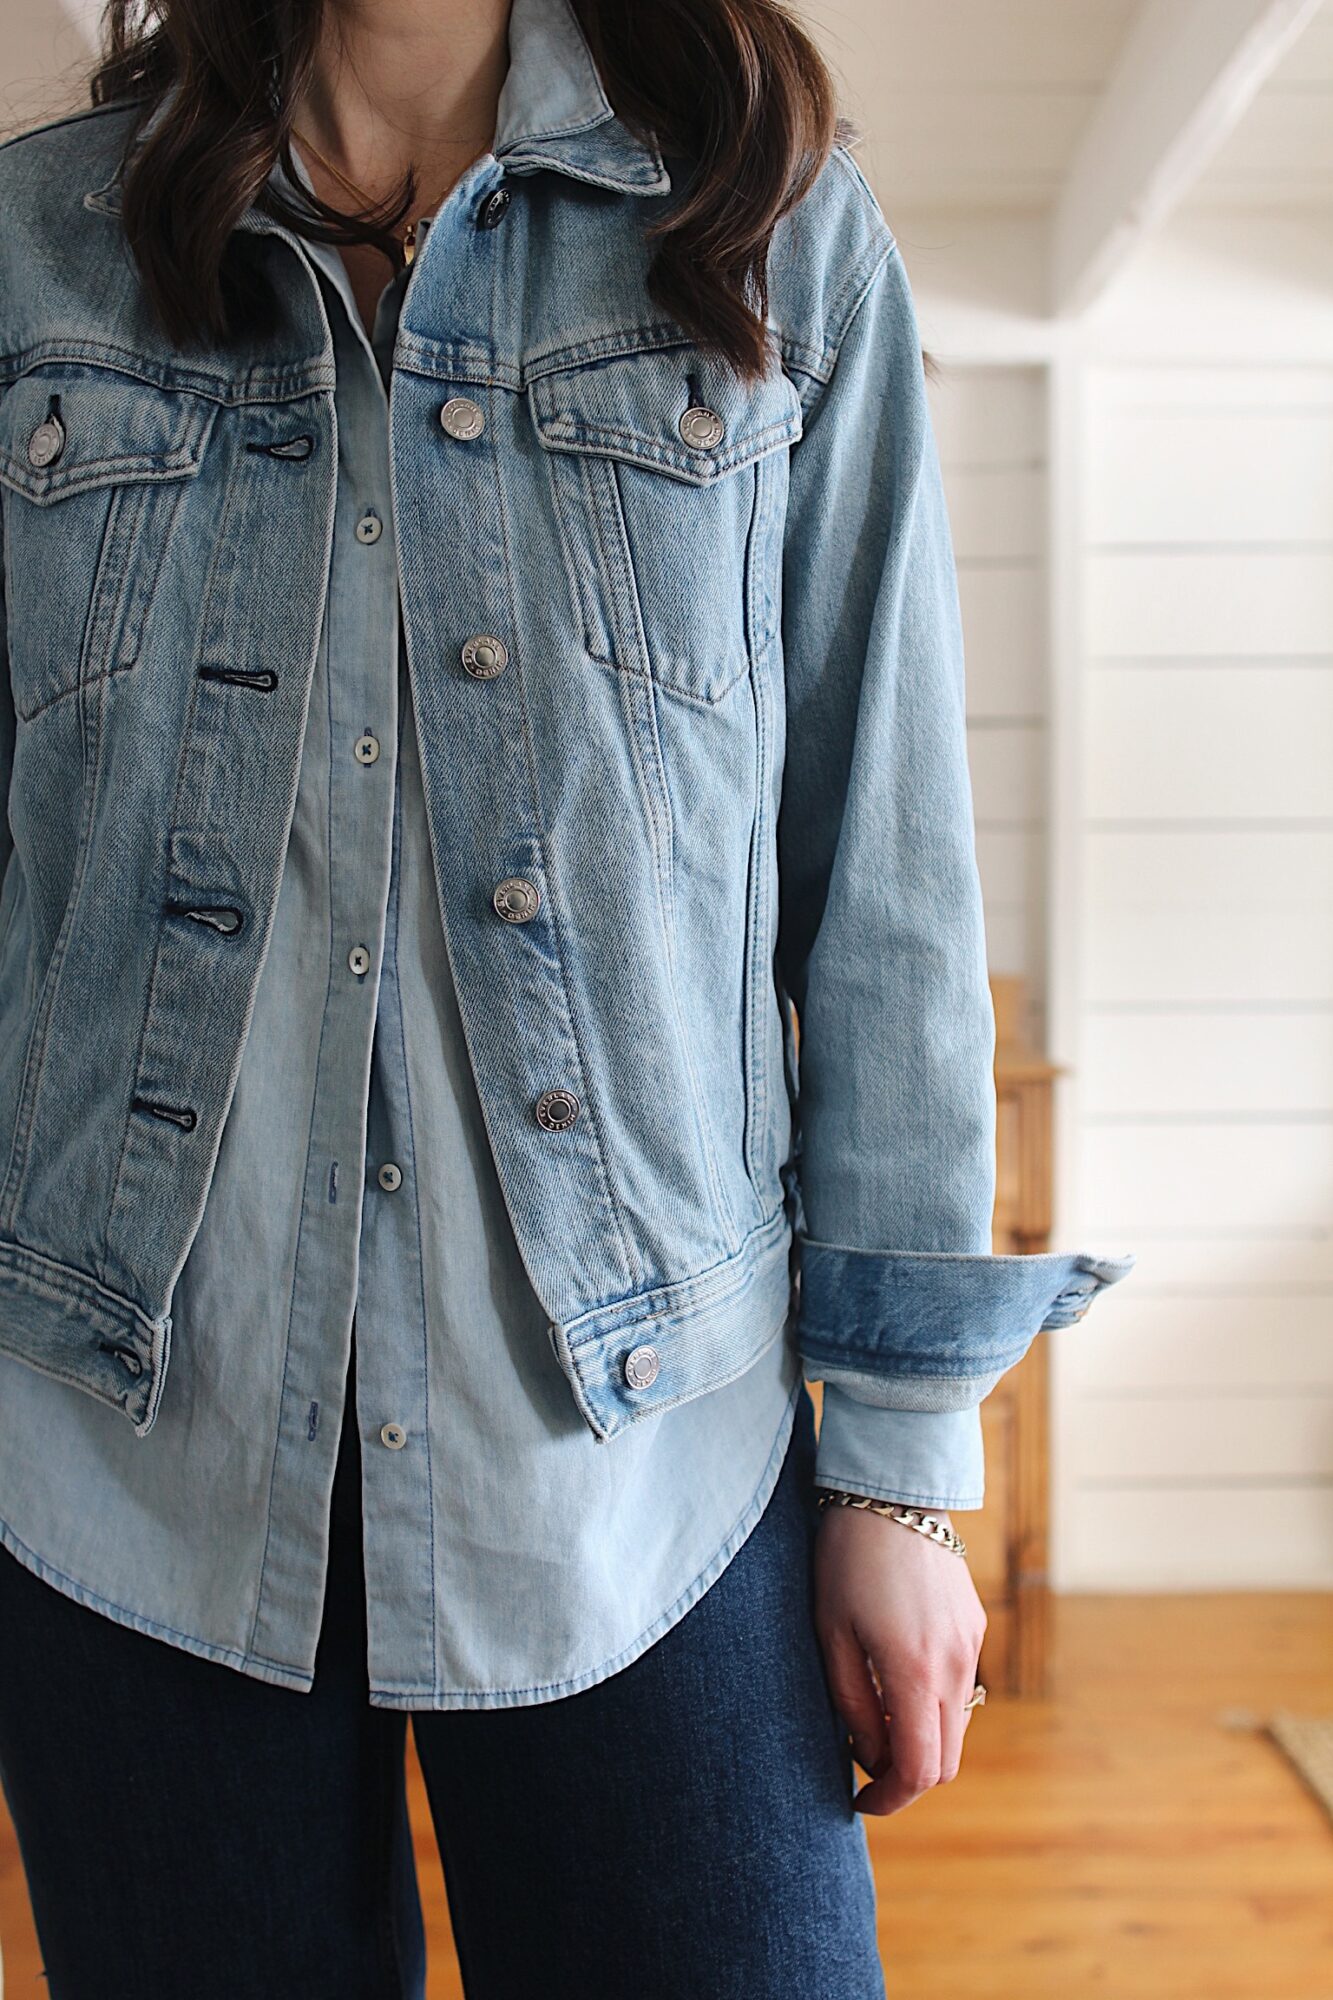 Style Bee - DENIM JACKET, CHAMBRAY SHIRT, STRAIGHT LEG JEANS AND CONVERSE HIGH TOPS